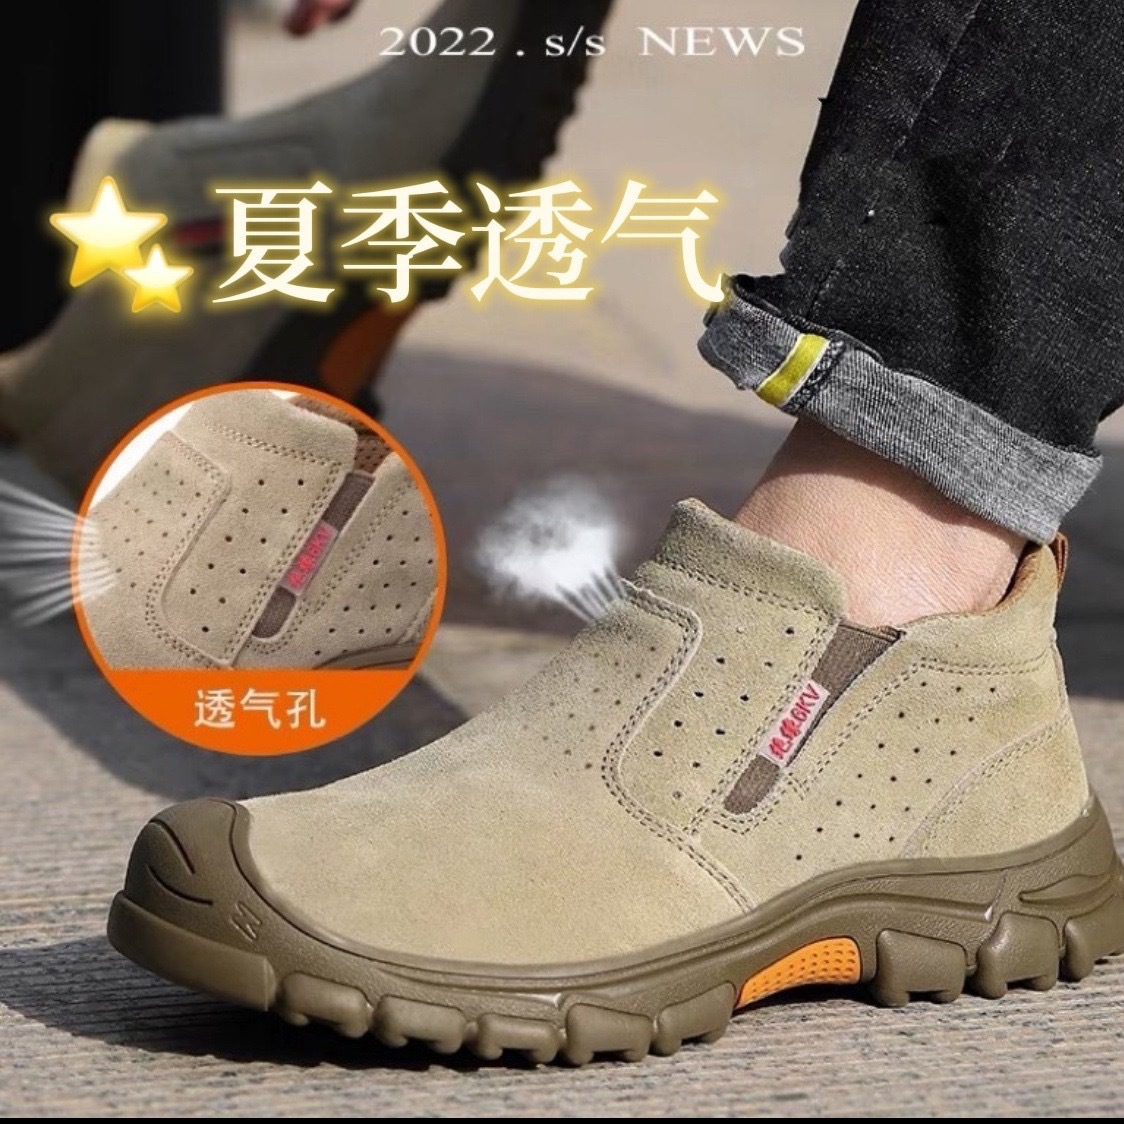 Waterproof Safety Shoes Men's Breathable Deodorant Wear Resistant Light Work Shoes Anti-Smashing and Anti-Penetration Insulated Safety Shoes Wholesale Black